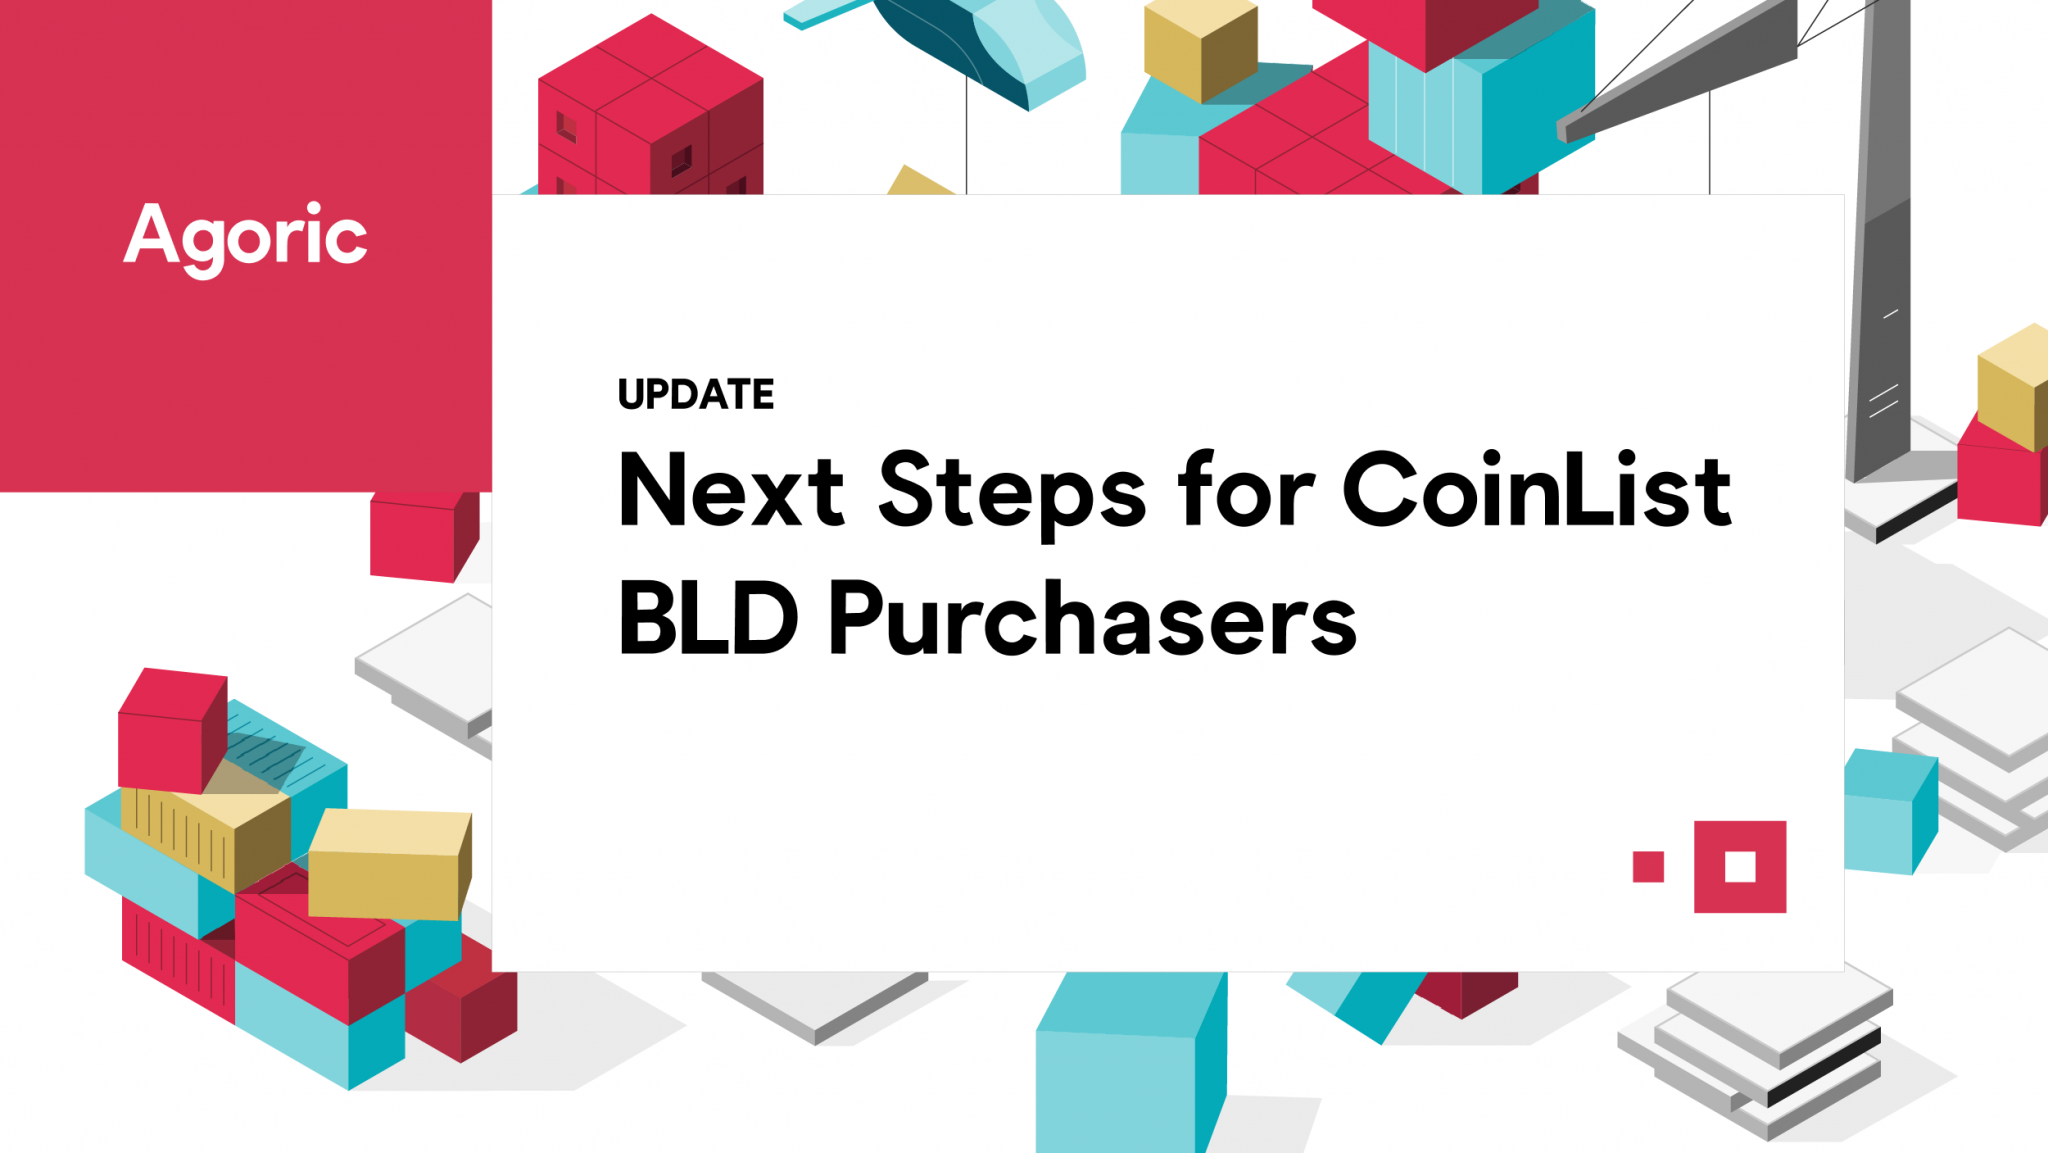 Next Steps for CoinList BLD Purchasers